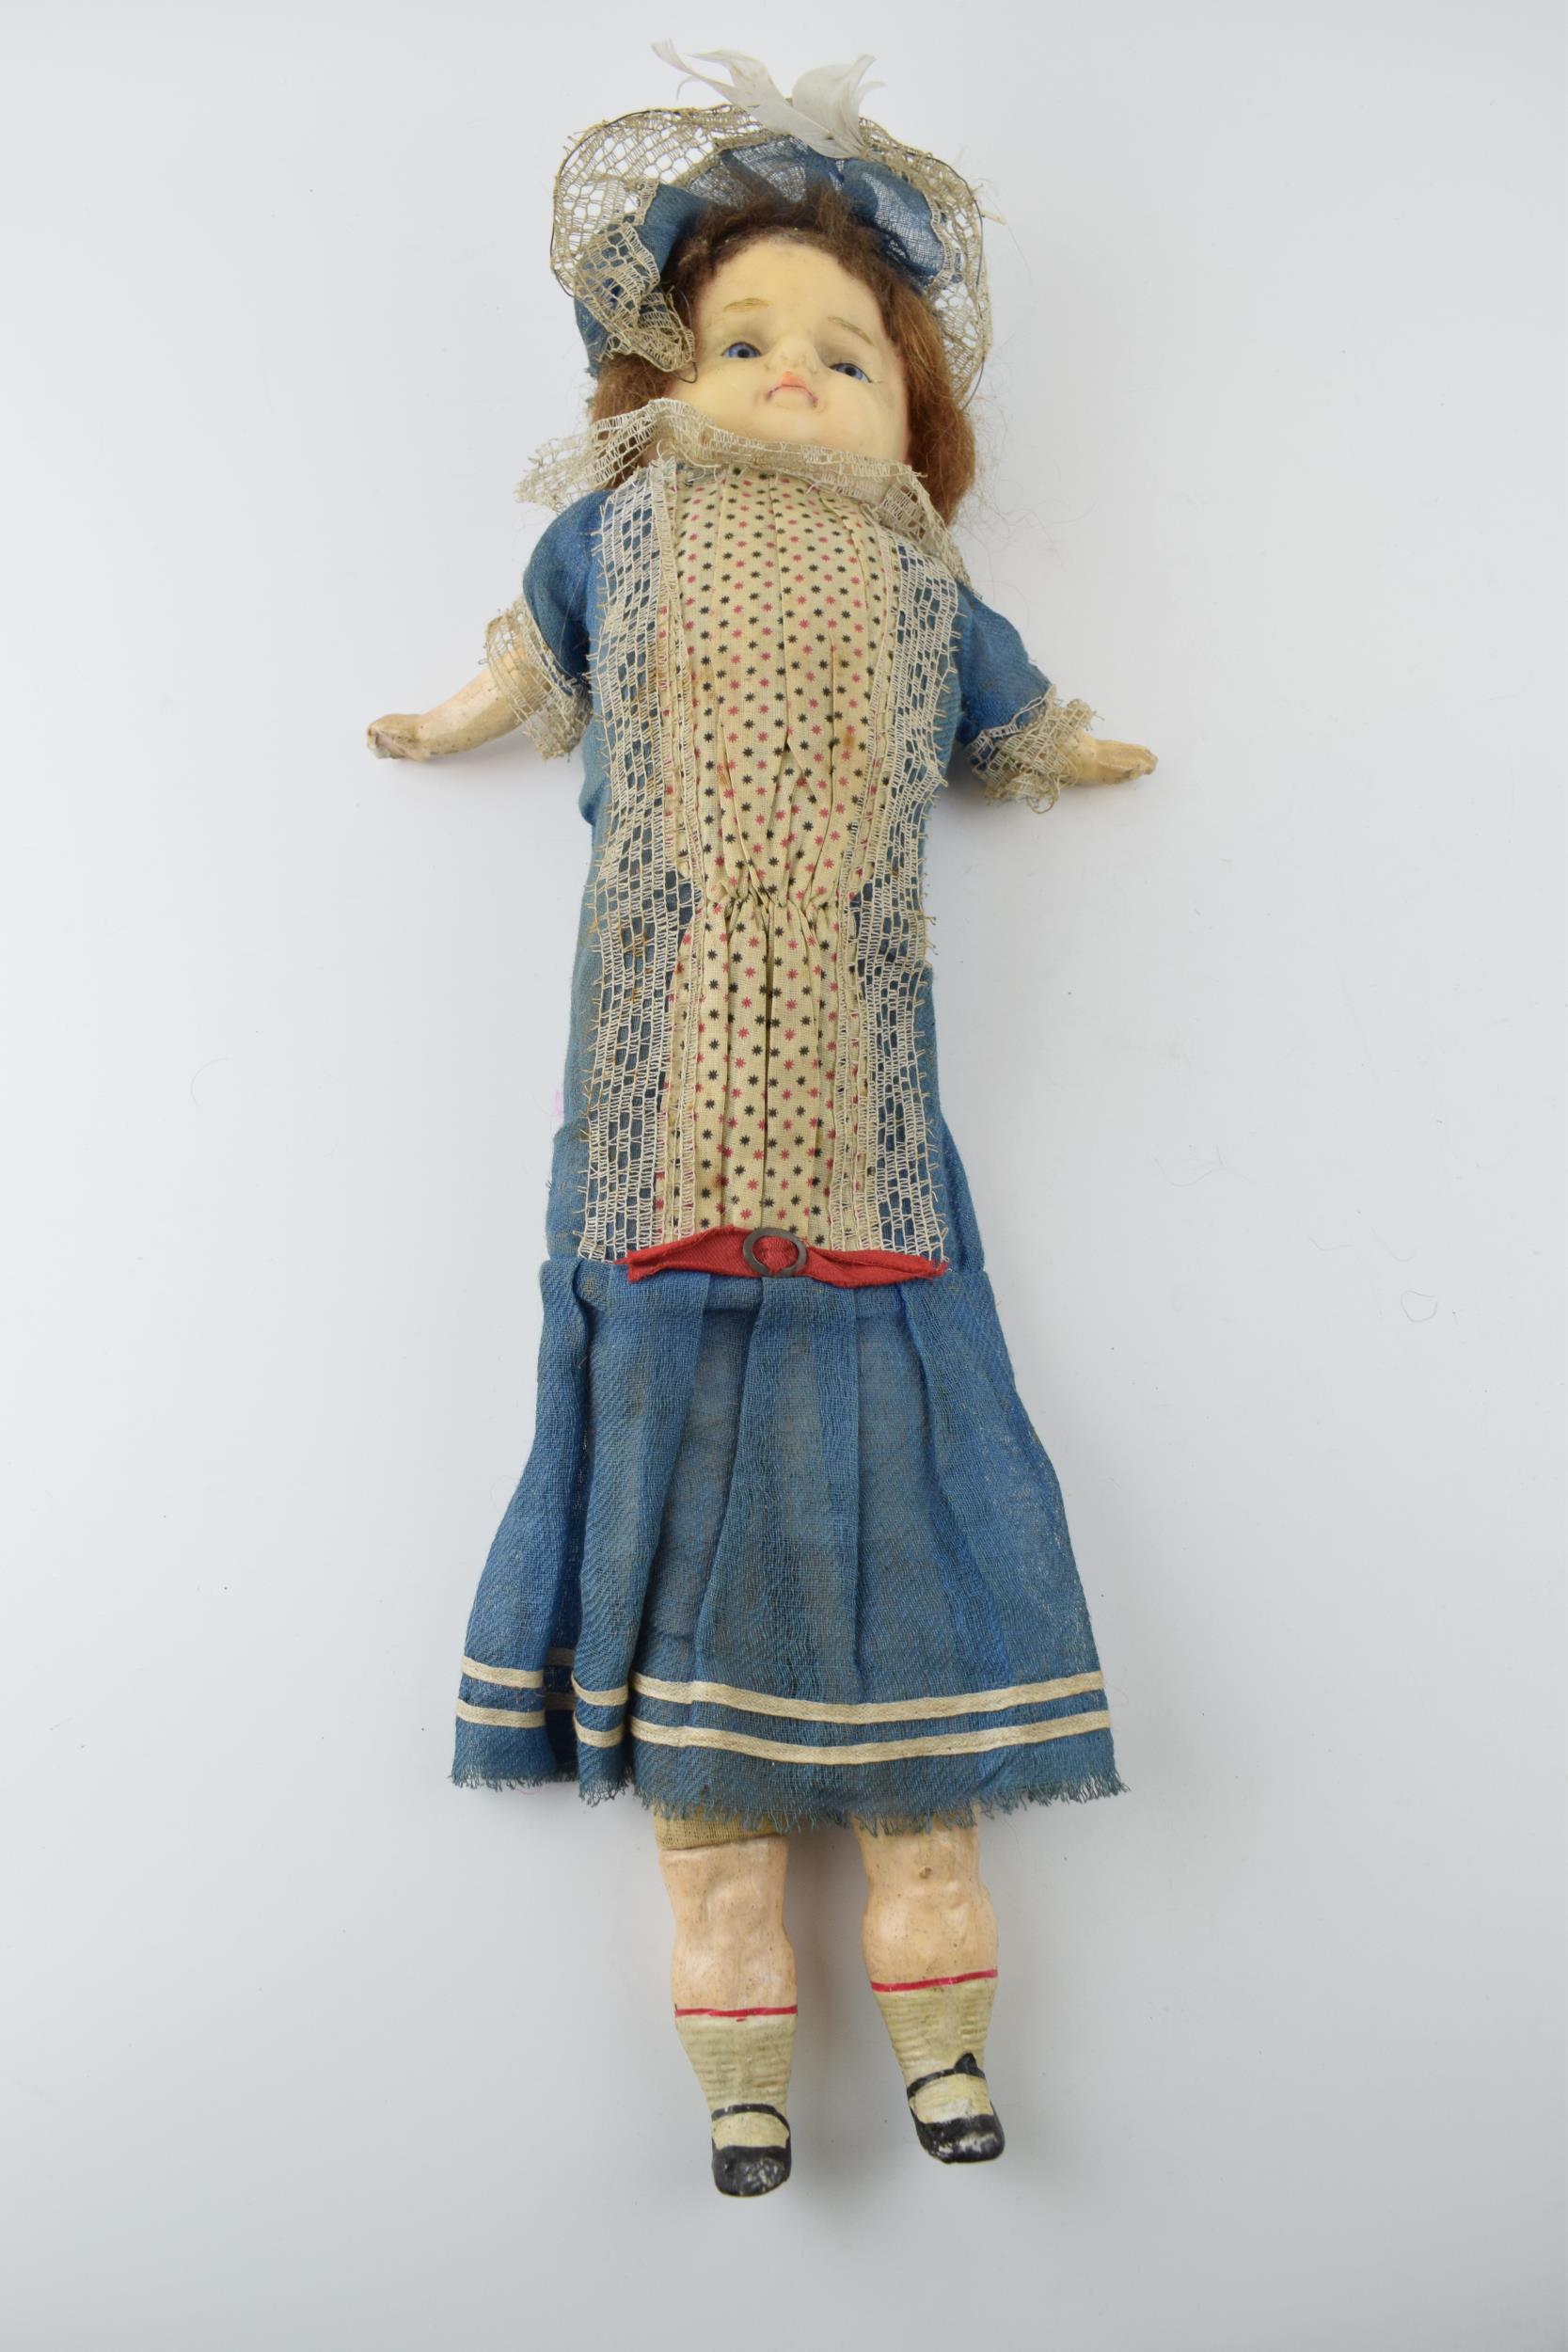 Wax head antique doll in blue dress c1860. Height 54cm. In good antique condition with some light - Image 2 of 7